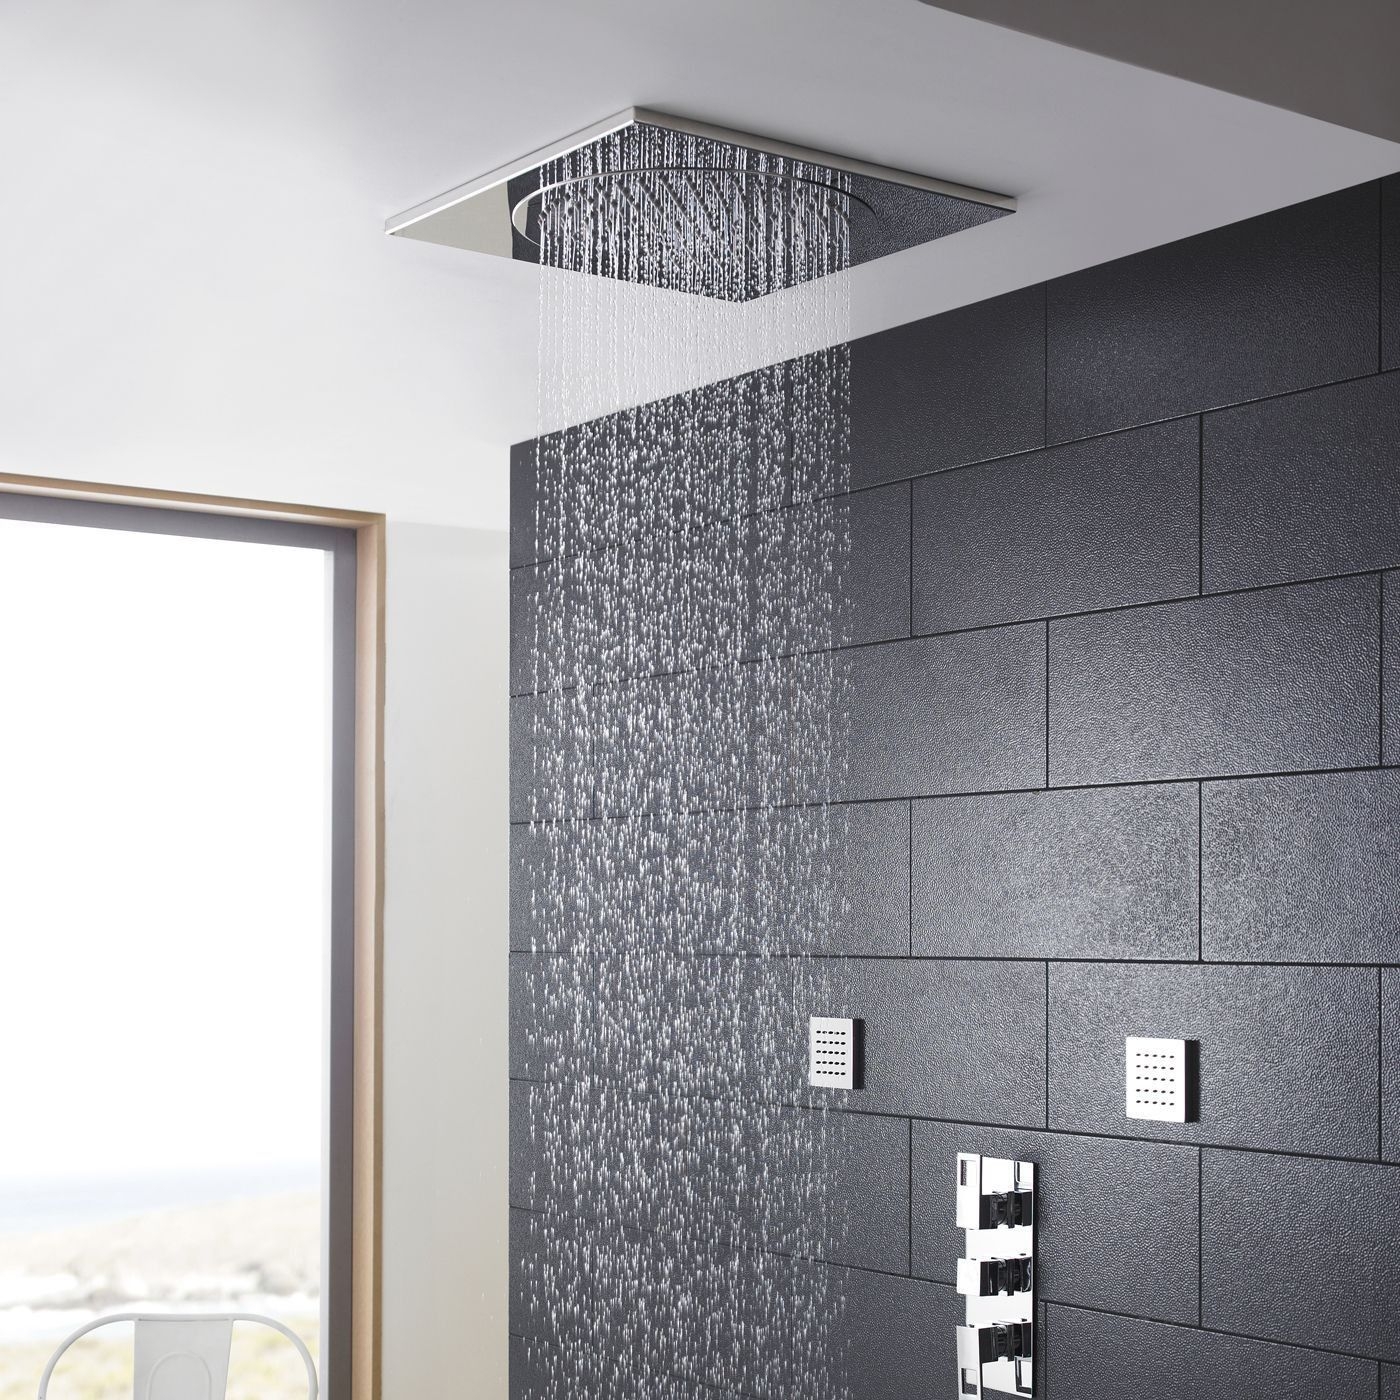 Permalink to Ceiling Tile Shower Head